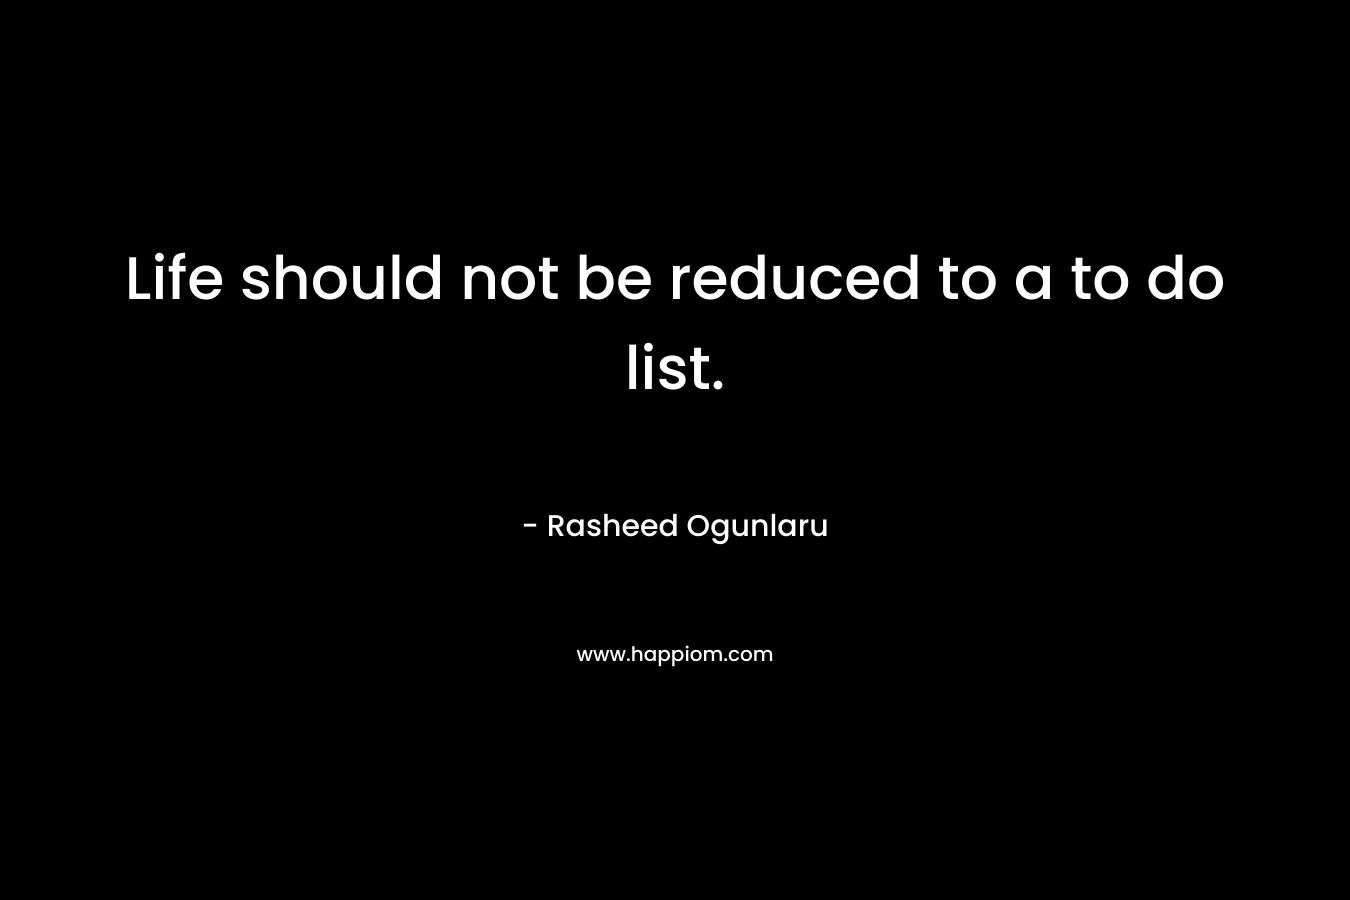 Life should not be reduced to a to do list.